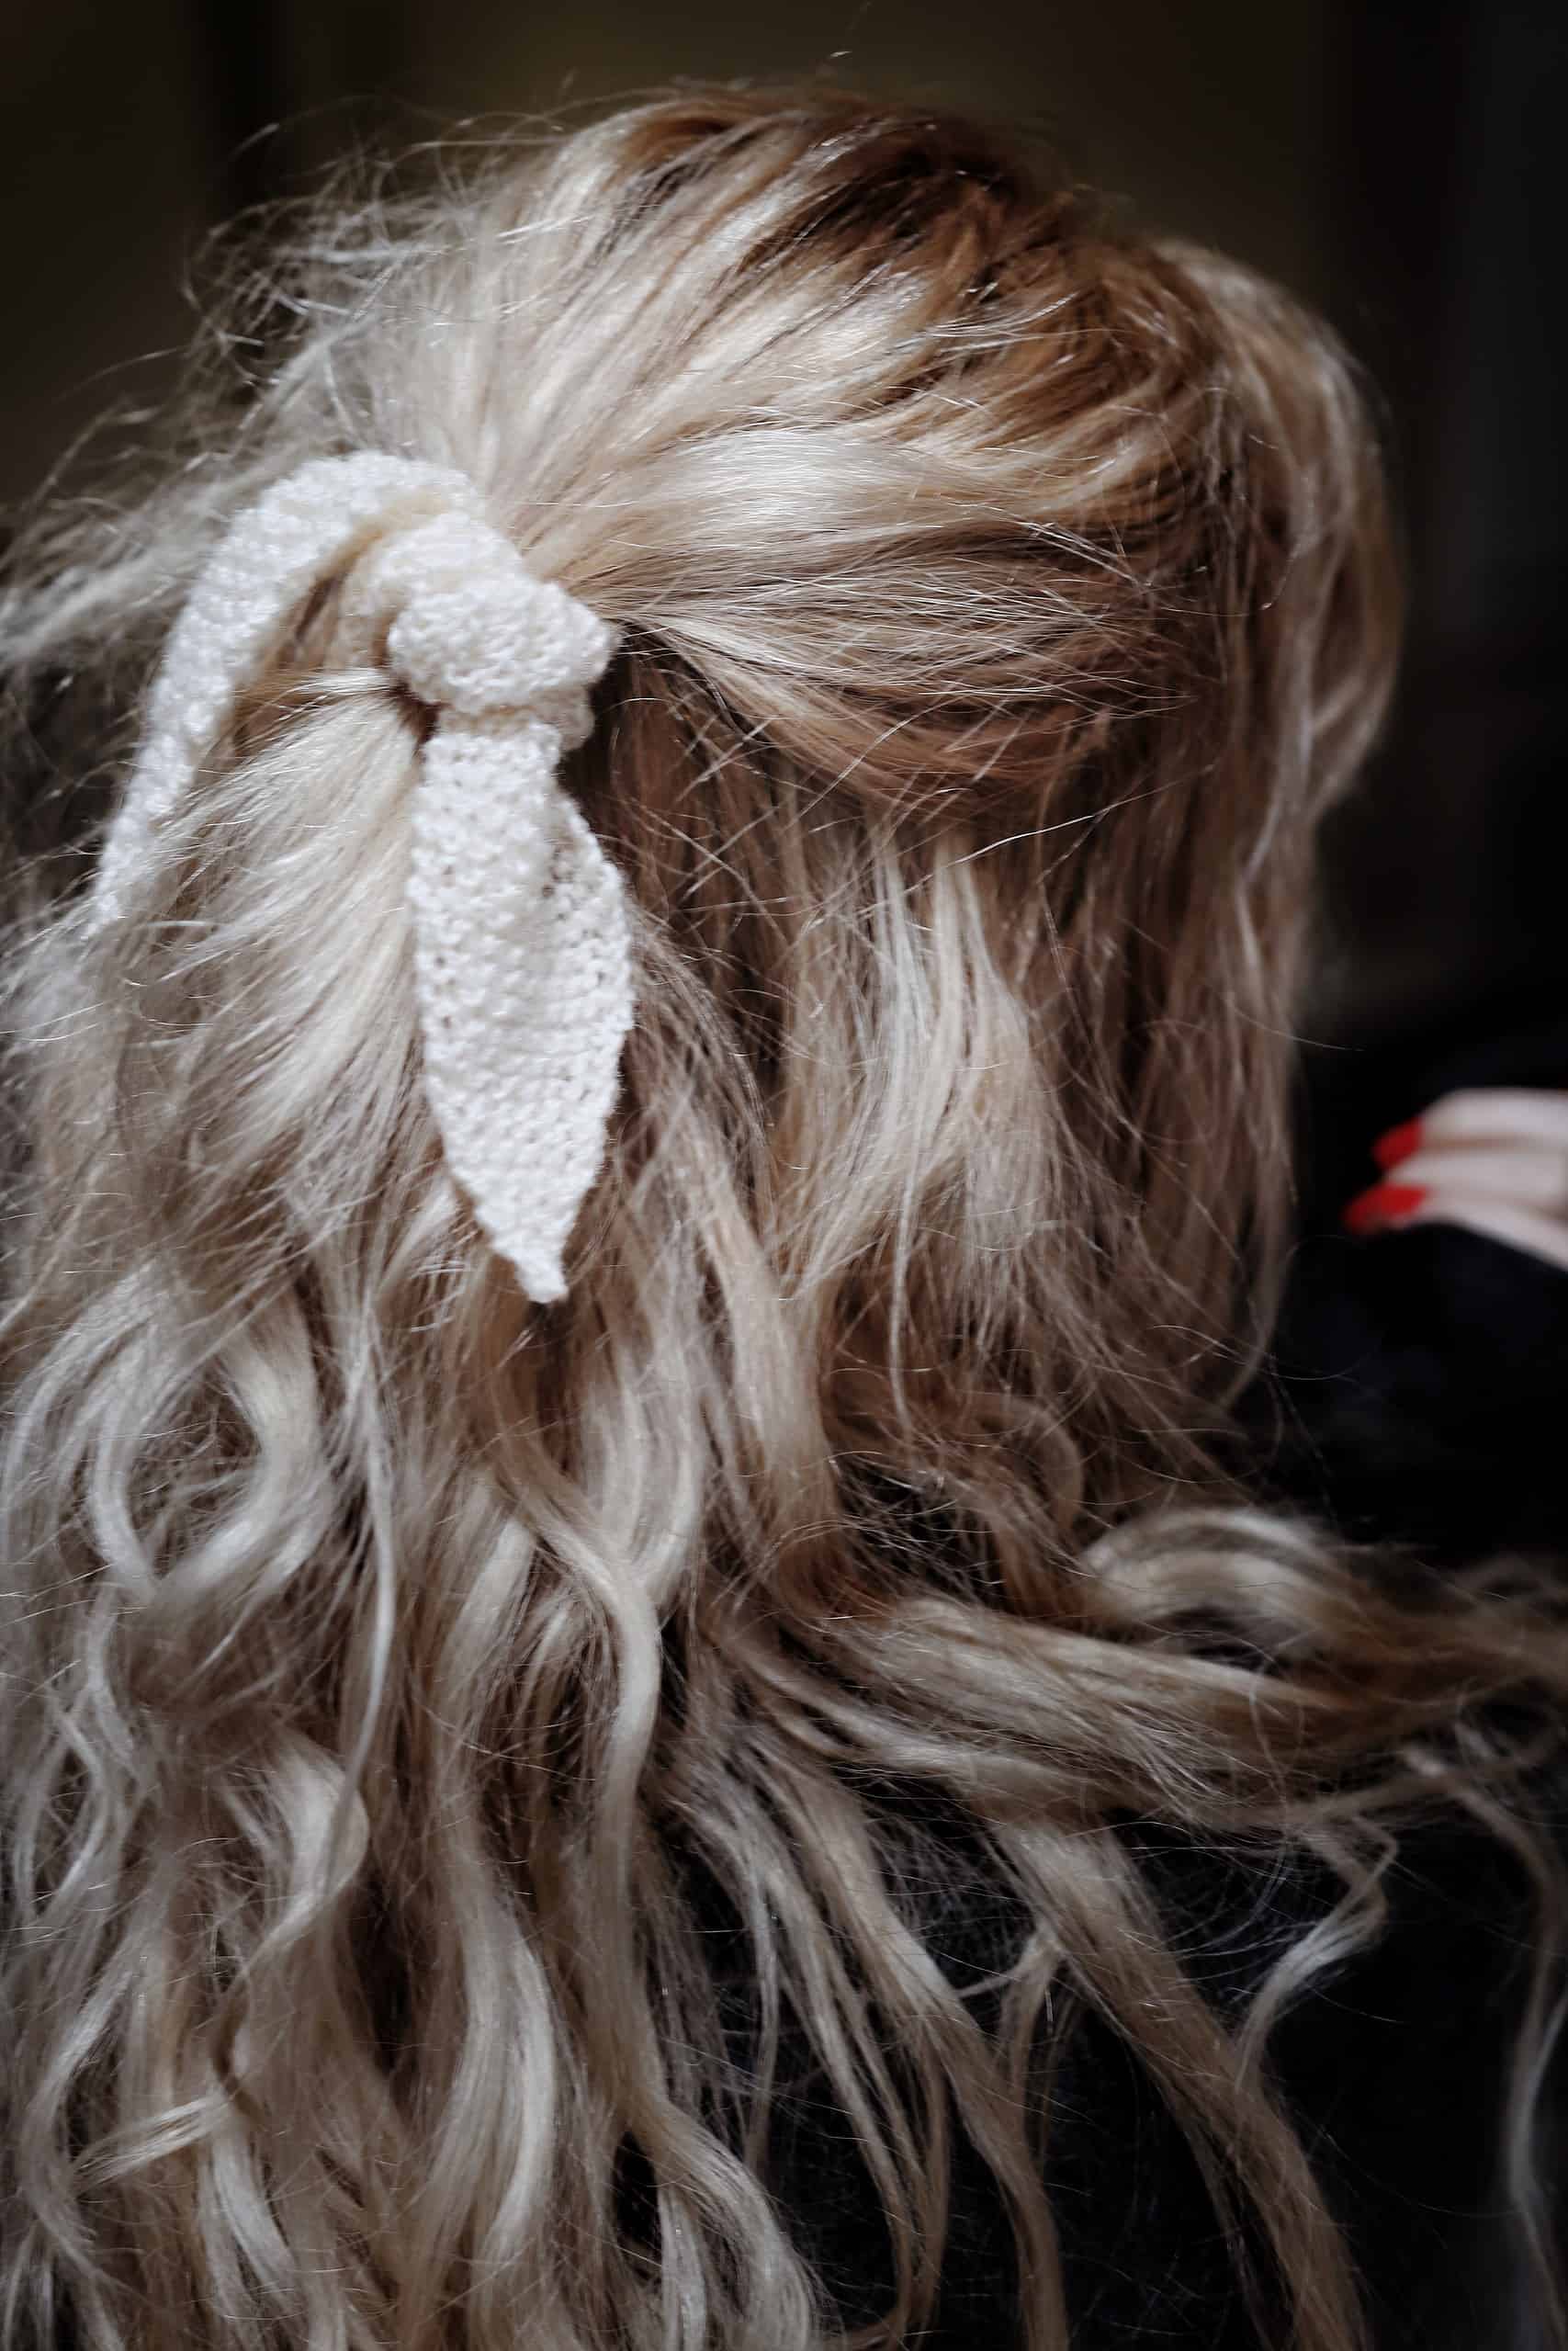 The Petal Hair Tie Knitting Pattern: A Trendy Hair Accessory For Spring -